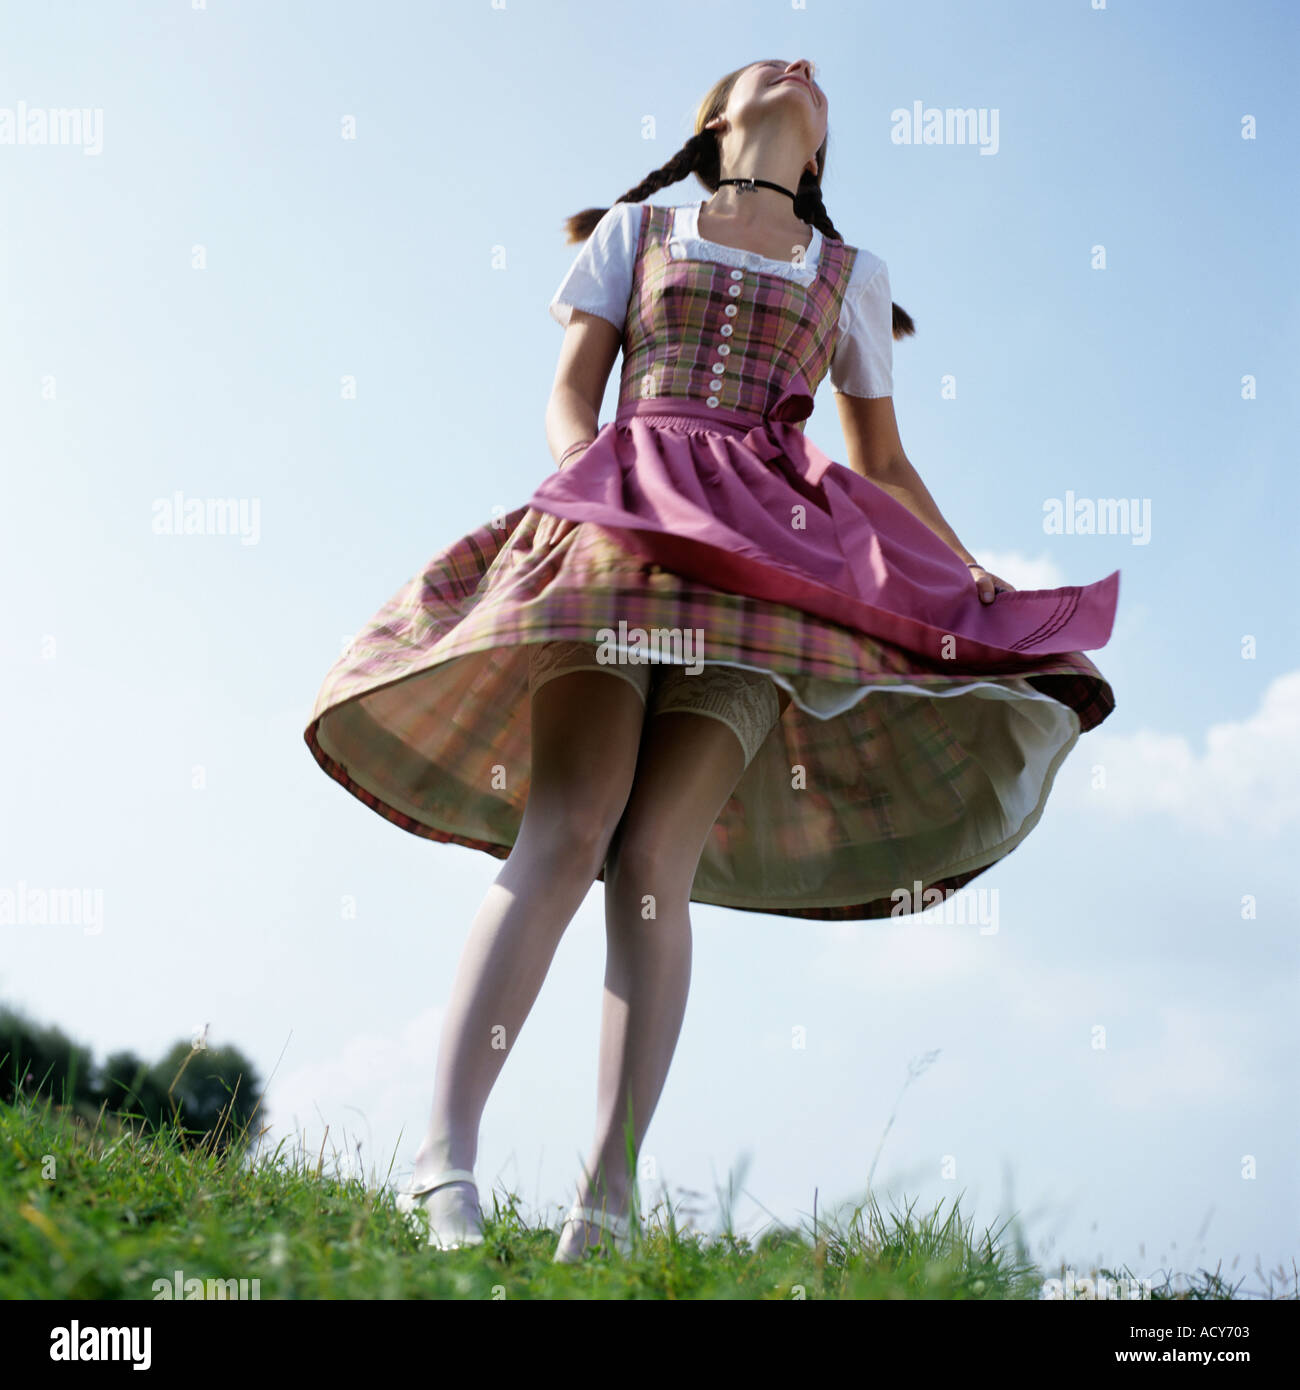 young woman in traditional German Bavarian dress dancing with lifted skirt Stock Photo